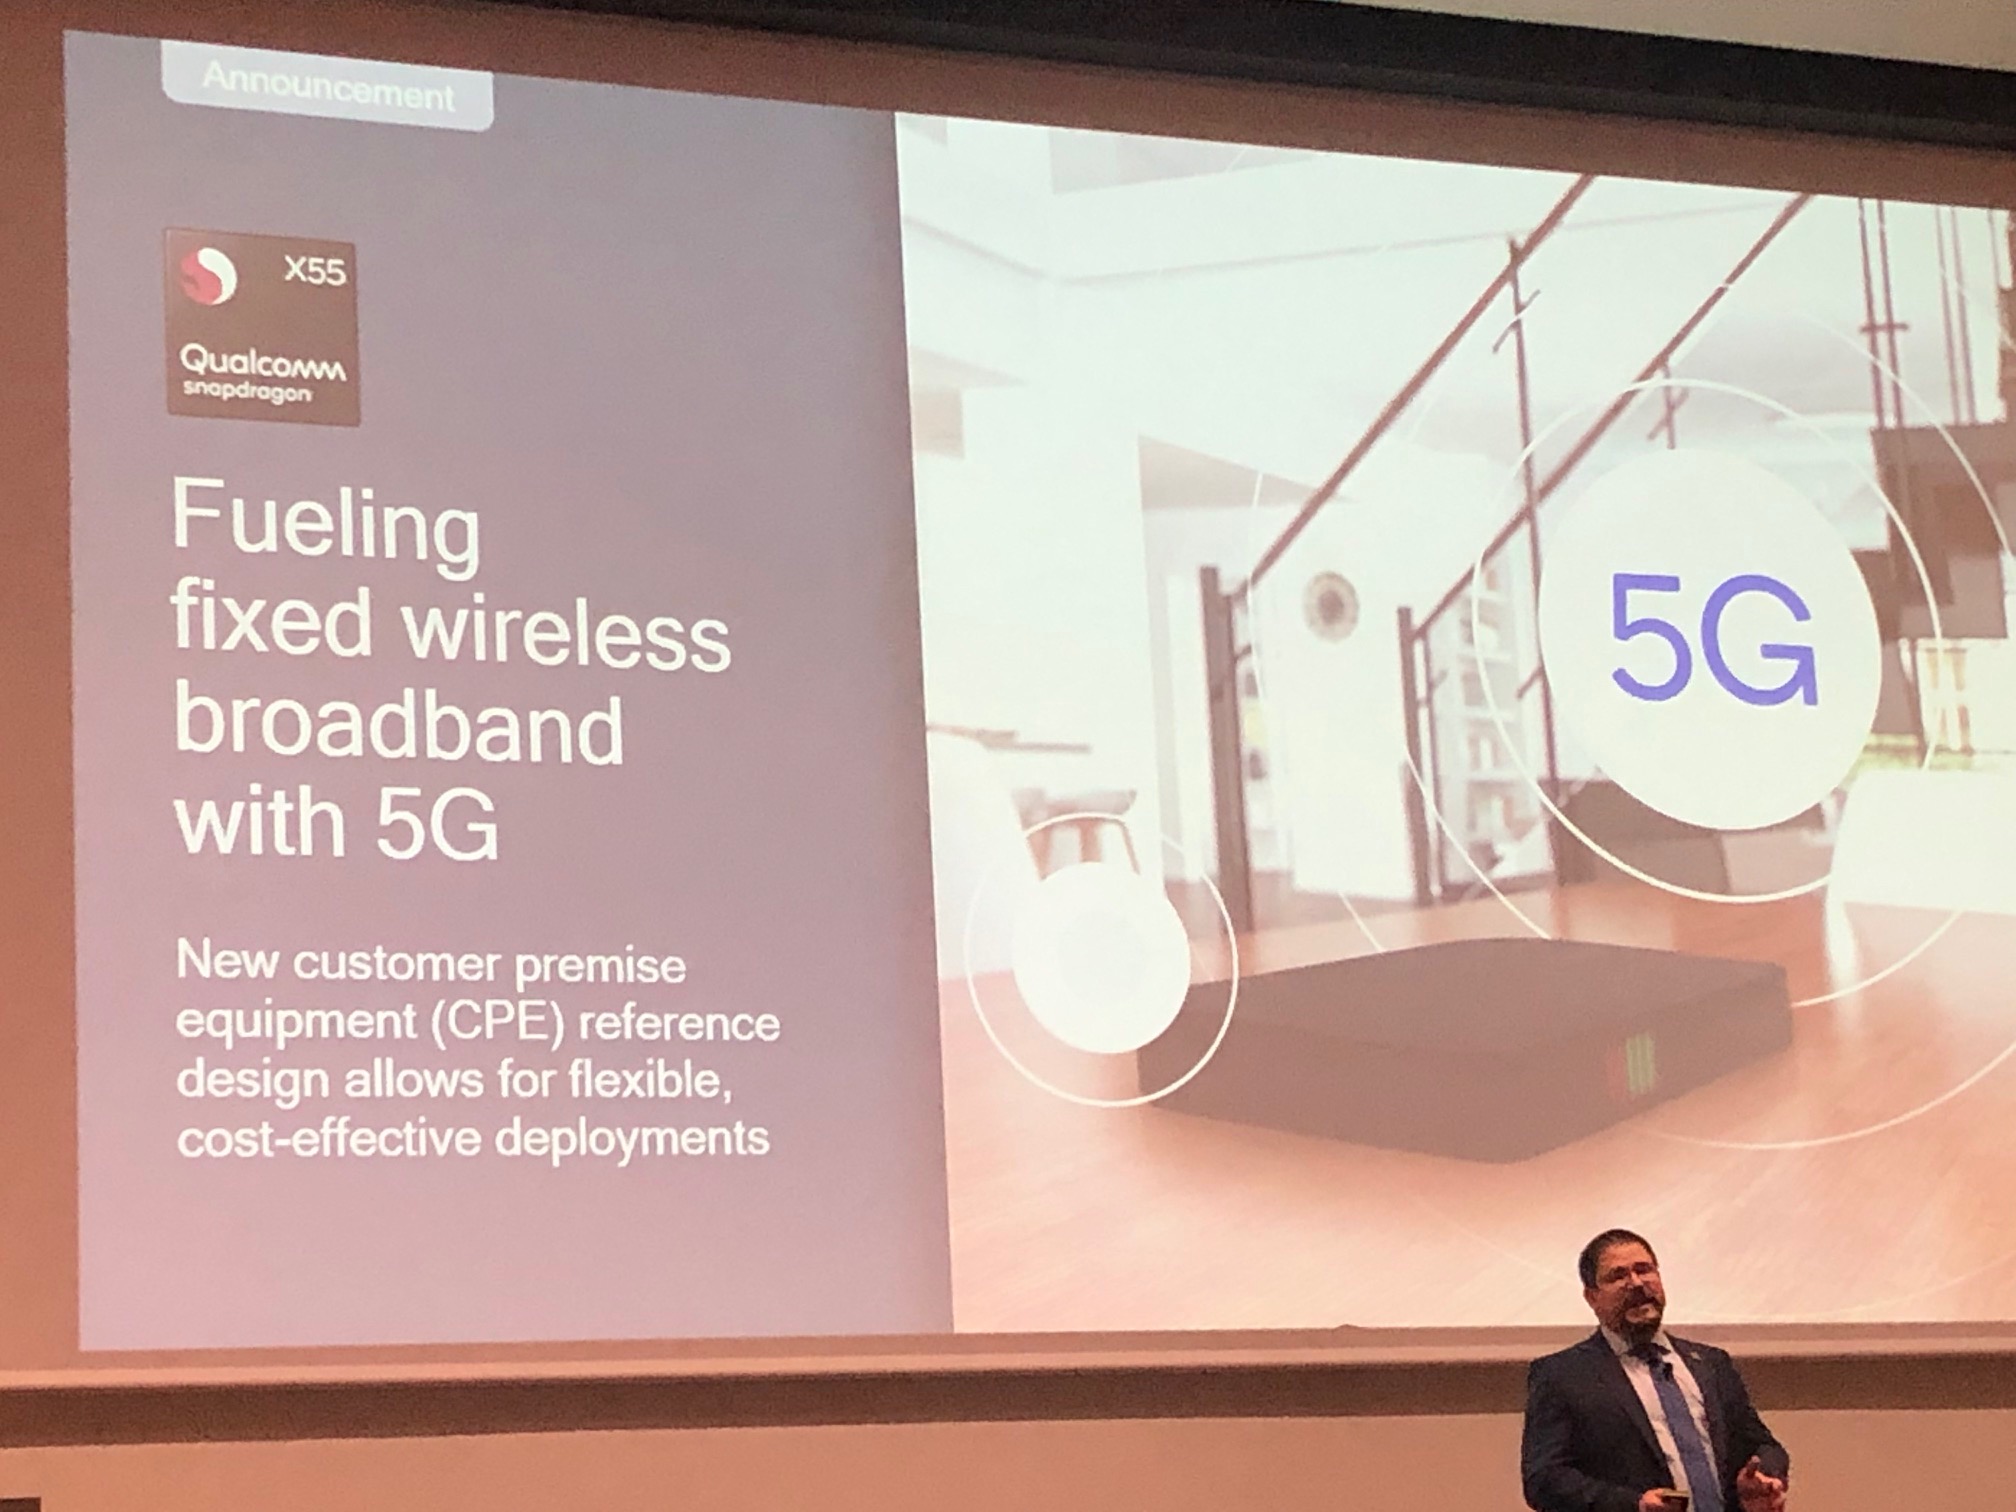 jammer gun owners should | Qualcomm Debuts CPE Reference Design for Fixed Wireless 5G Broadband